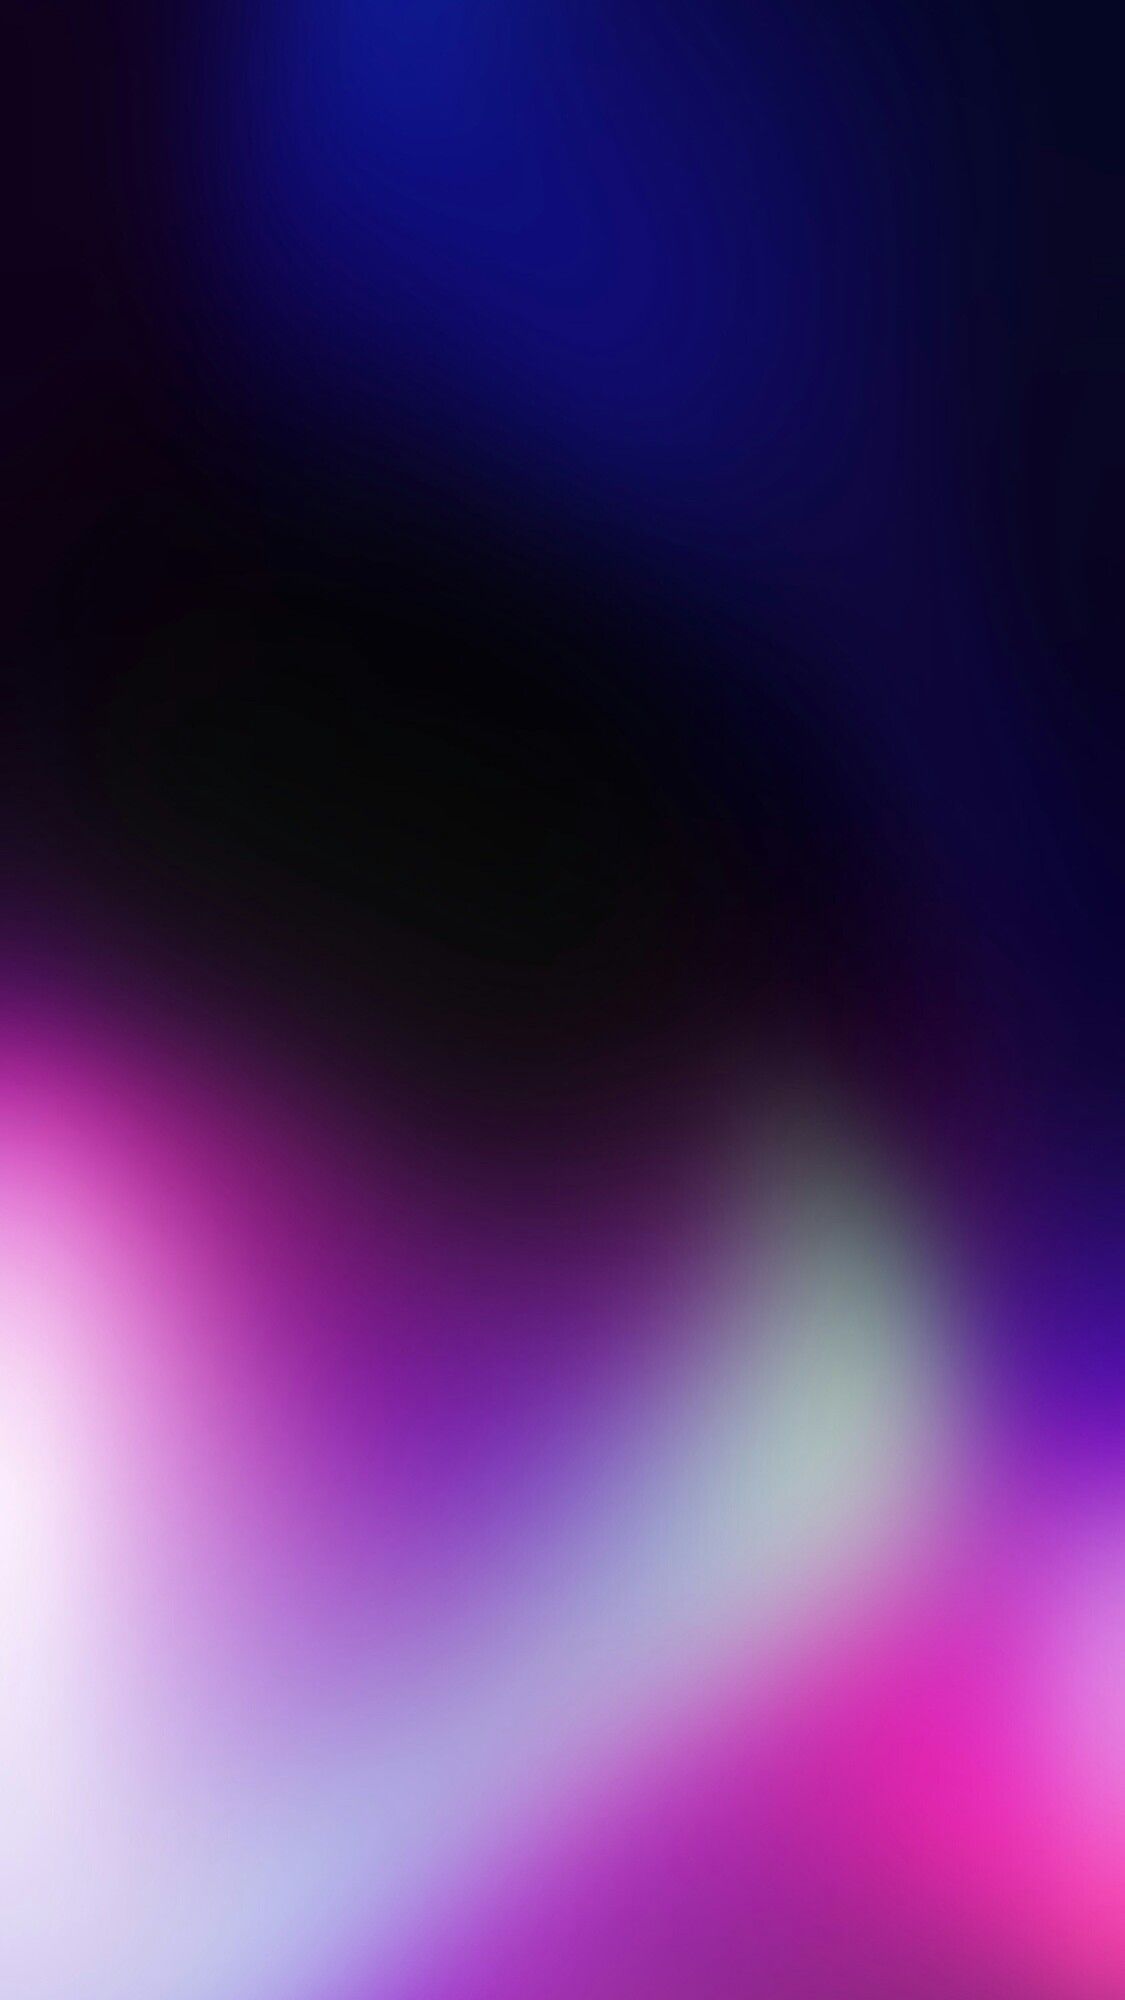 DESIGN. Xperia wallpaper, Abstract iphone